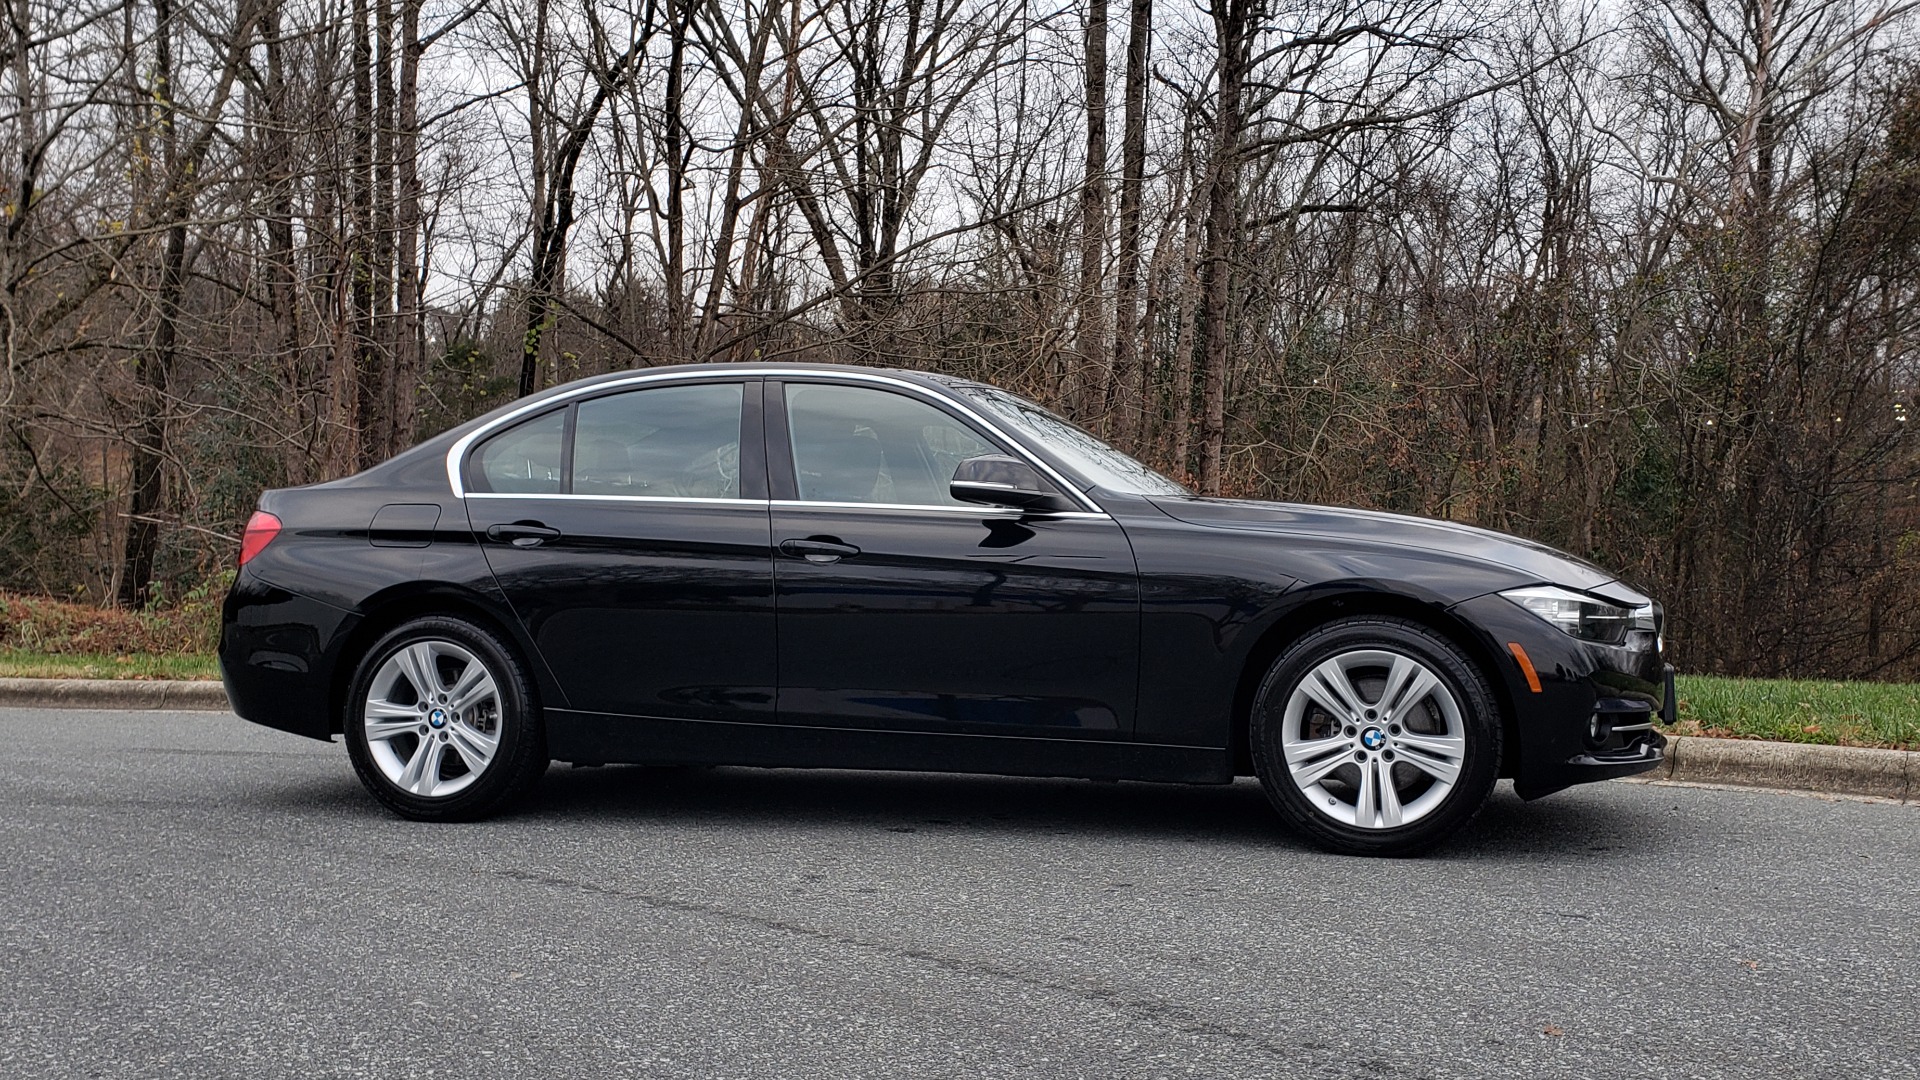 Used 2017 BMW 3 SERIES 330I XDRIVE / AWD / HEATED SEATS / LOW MILES for sale Sold at Formula Imports in Charlotte NC 28227 5